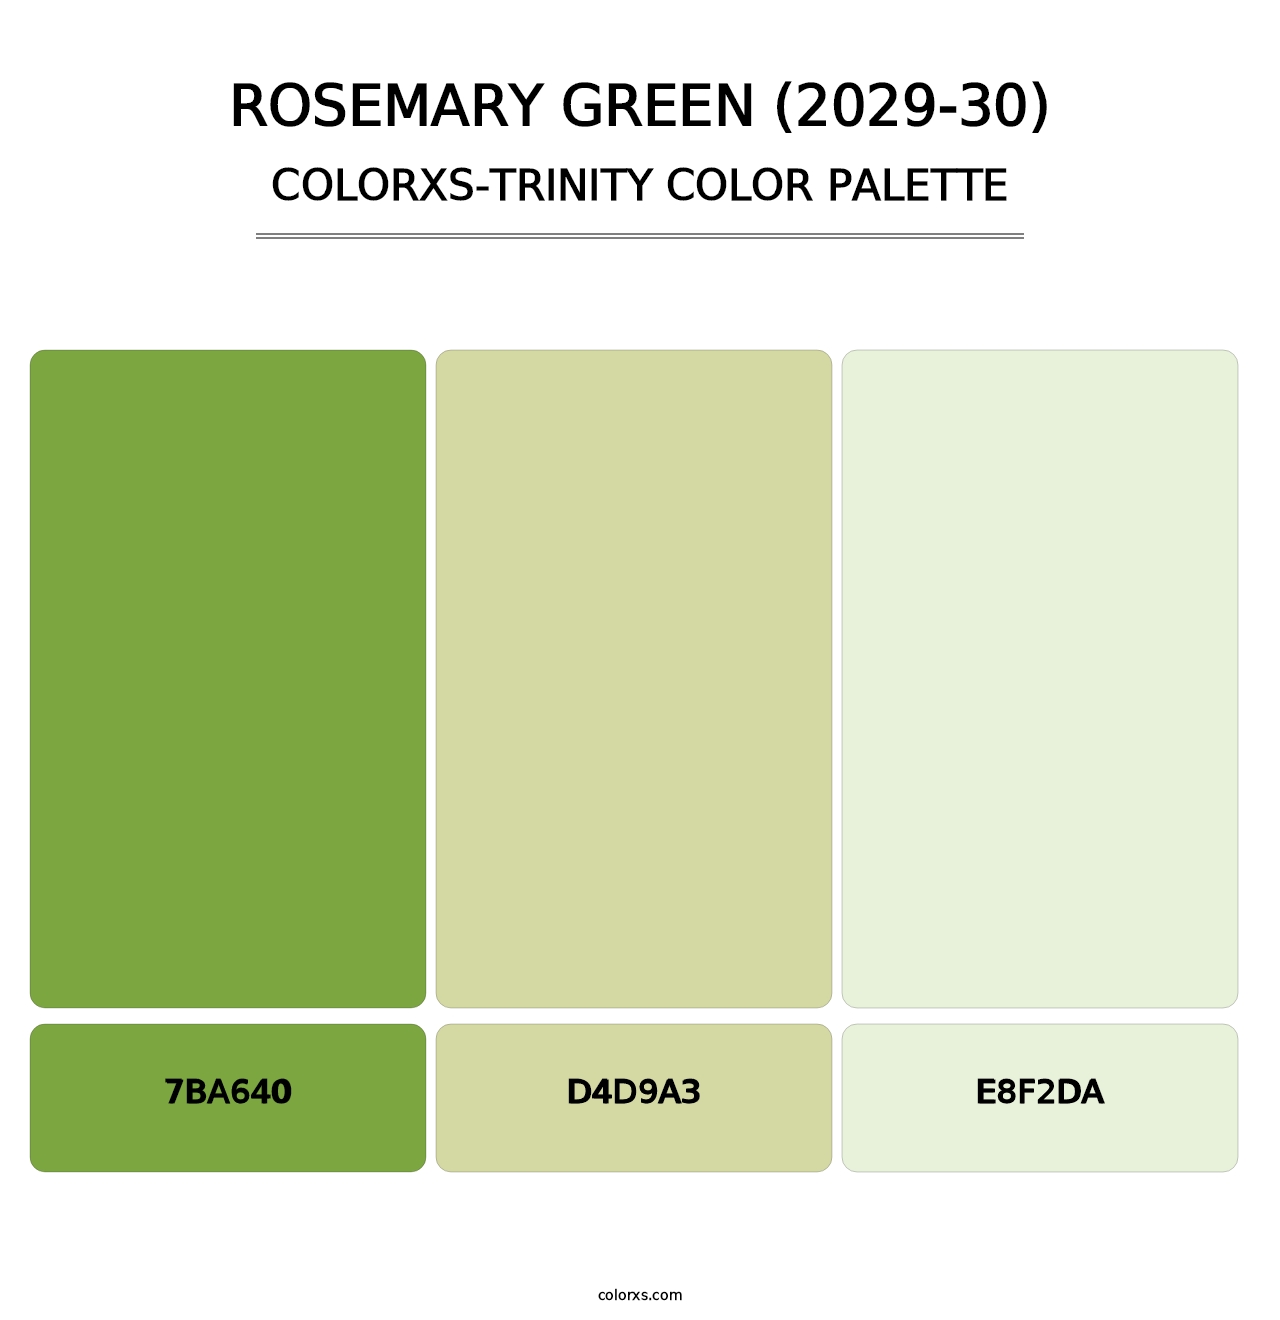 Rosemary Green (2029-30) - Colorxs Trinity Palette